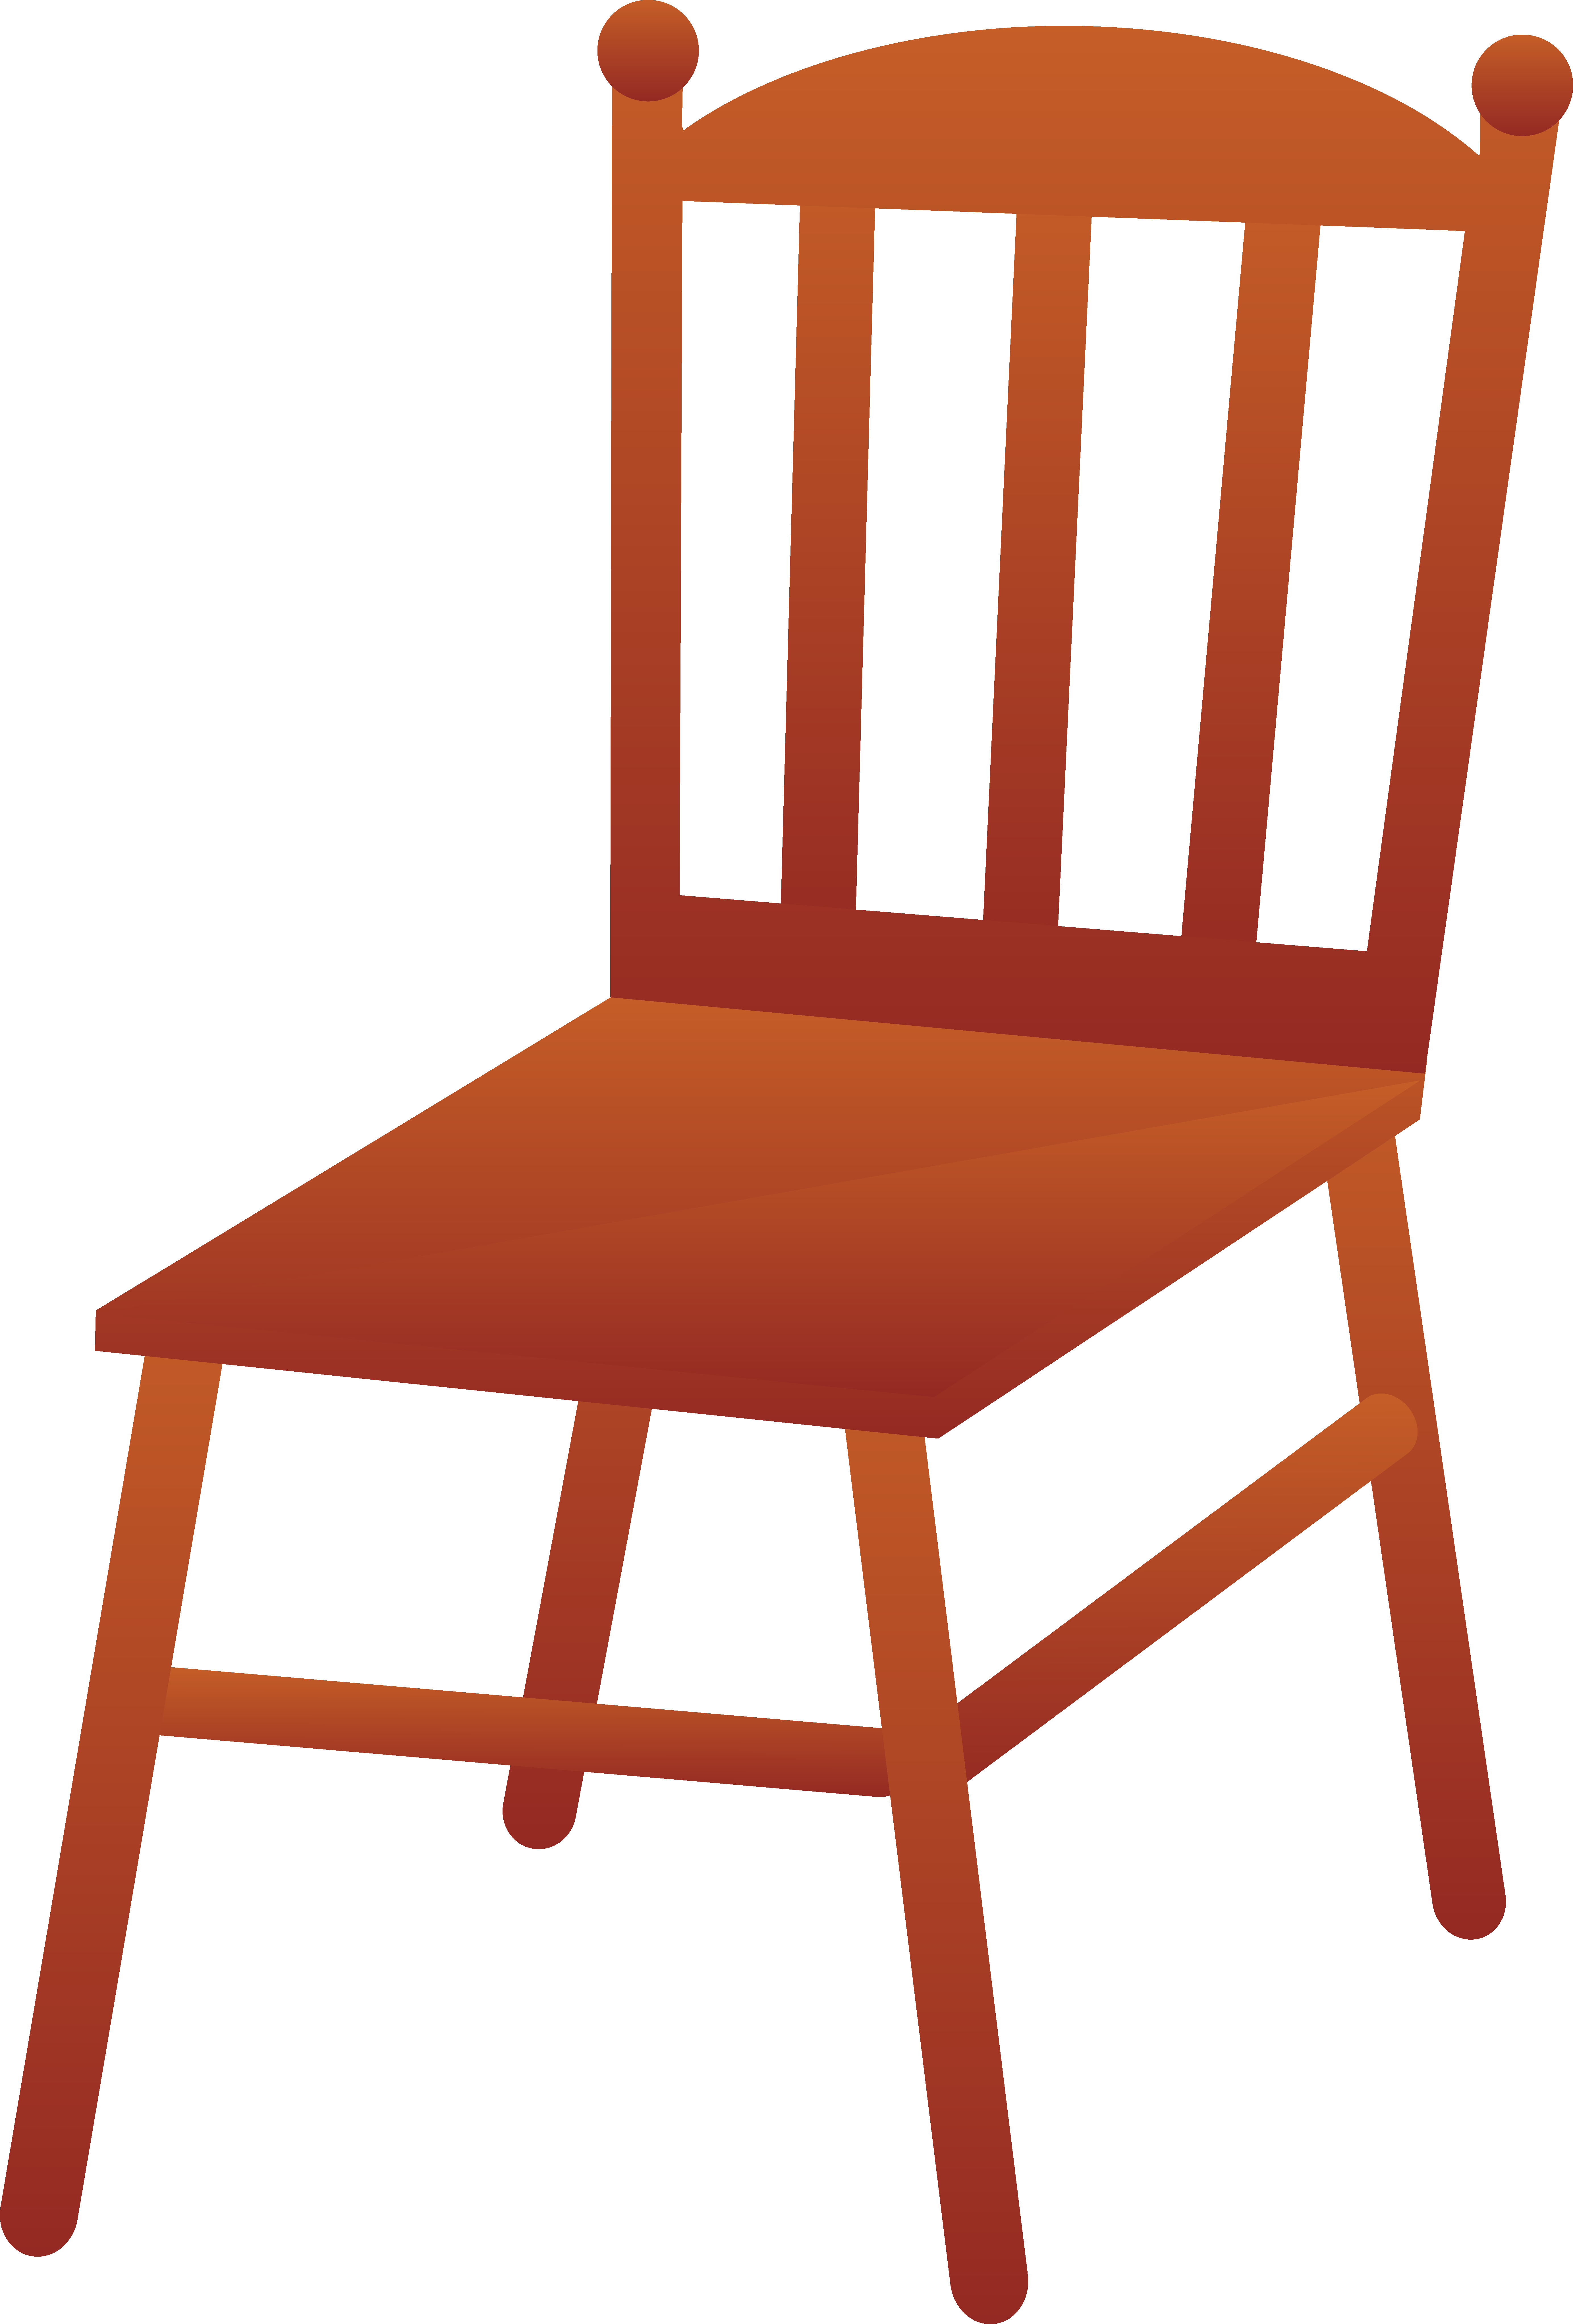 chair clipart black and white - Free Chair Clipart